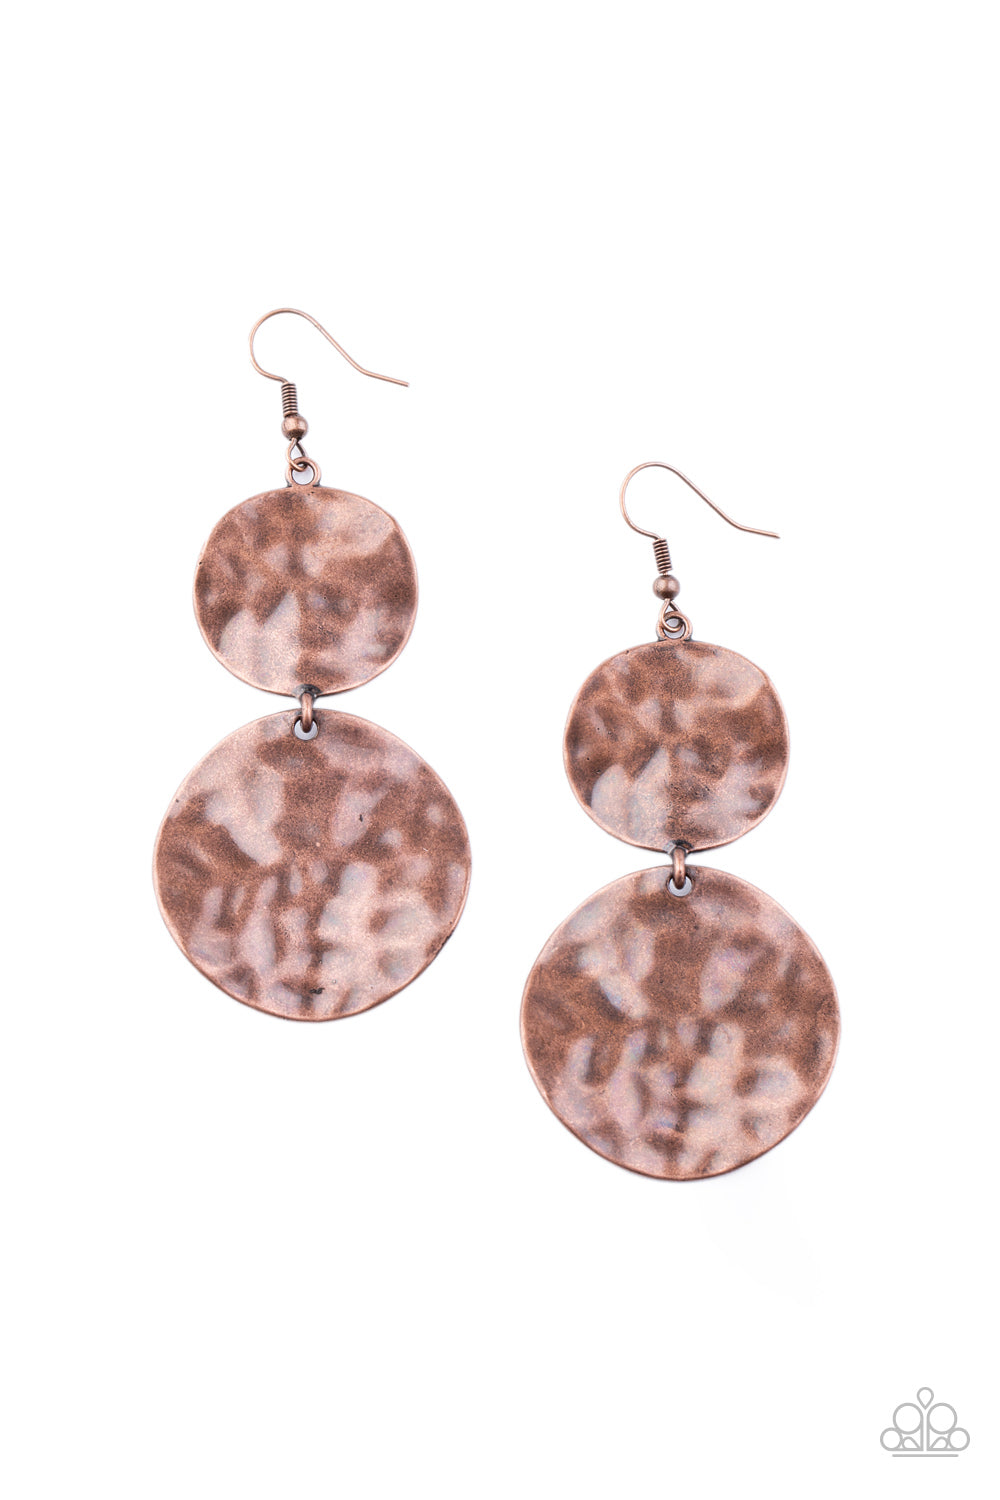 HARDWARE-Headed Copper Earring - Paparazzi Accessories